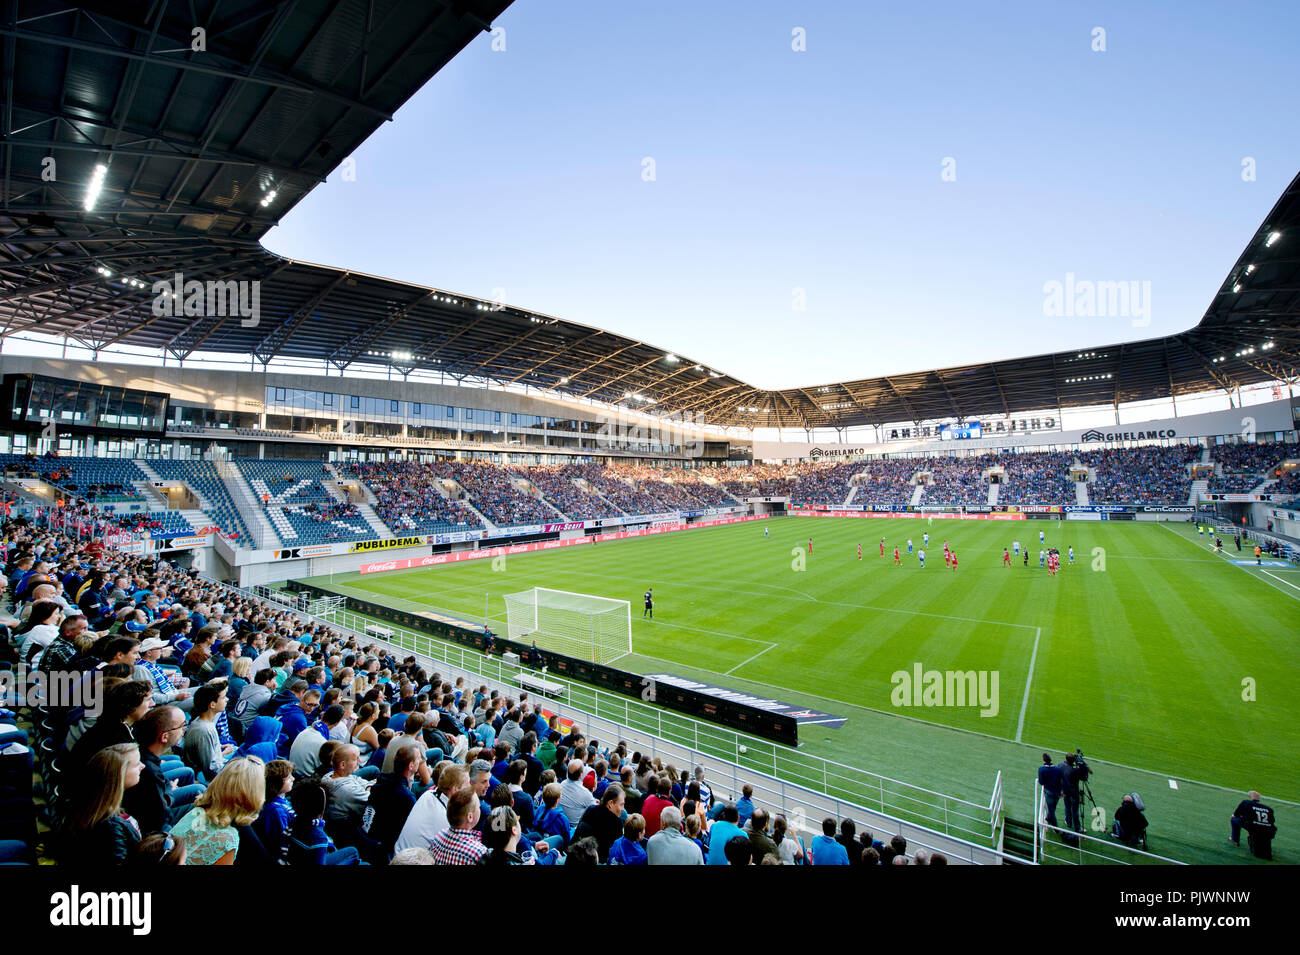 The Ghelamco Arena Football Stadium From Football Club Kaa Gent In Ghent Designed By Bontinck Architecture And Engineering Belgium 31 08 13 Stock Photo Alamy